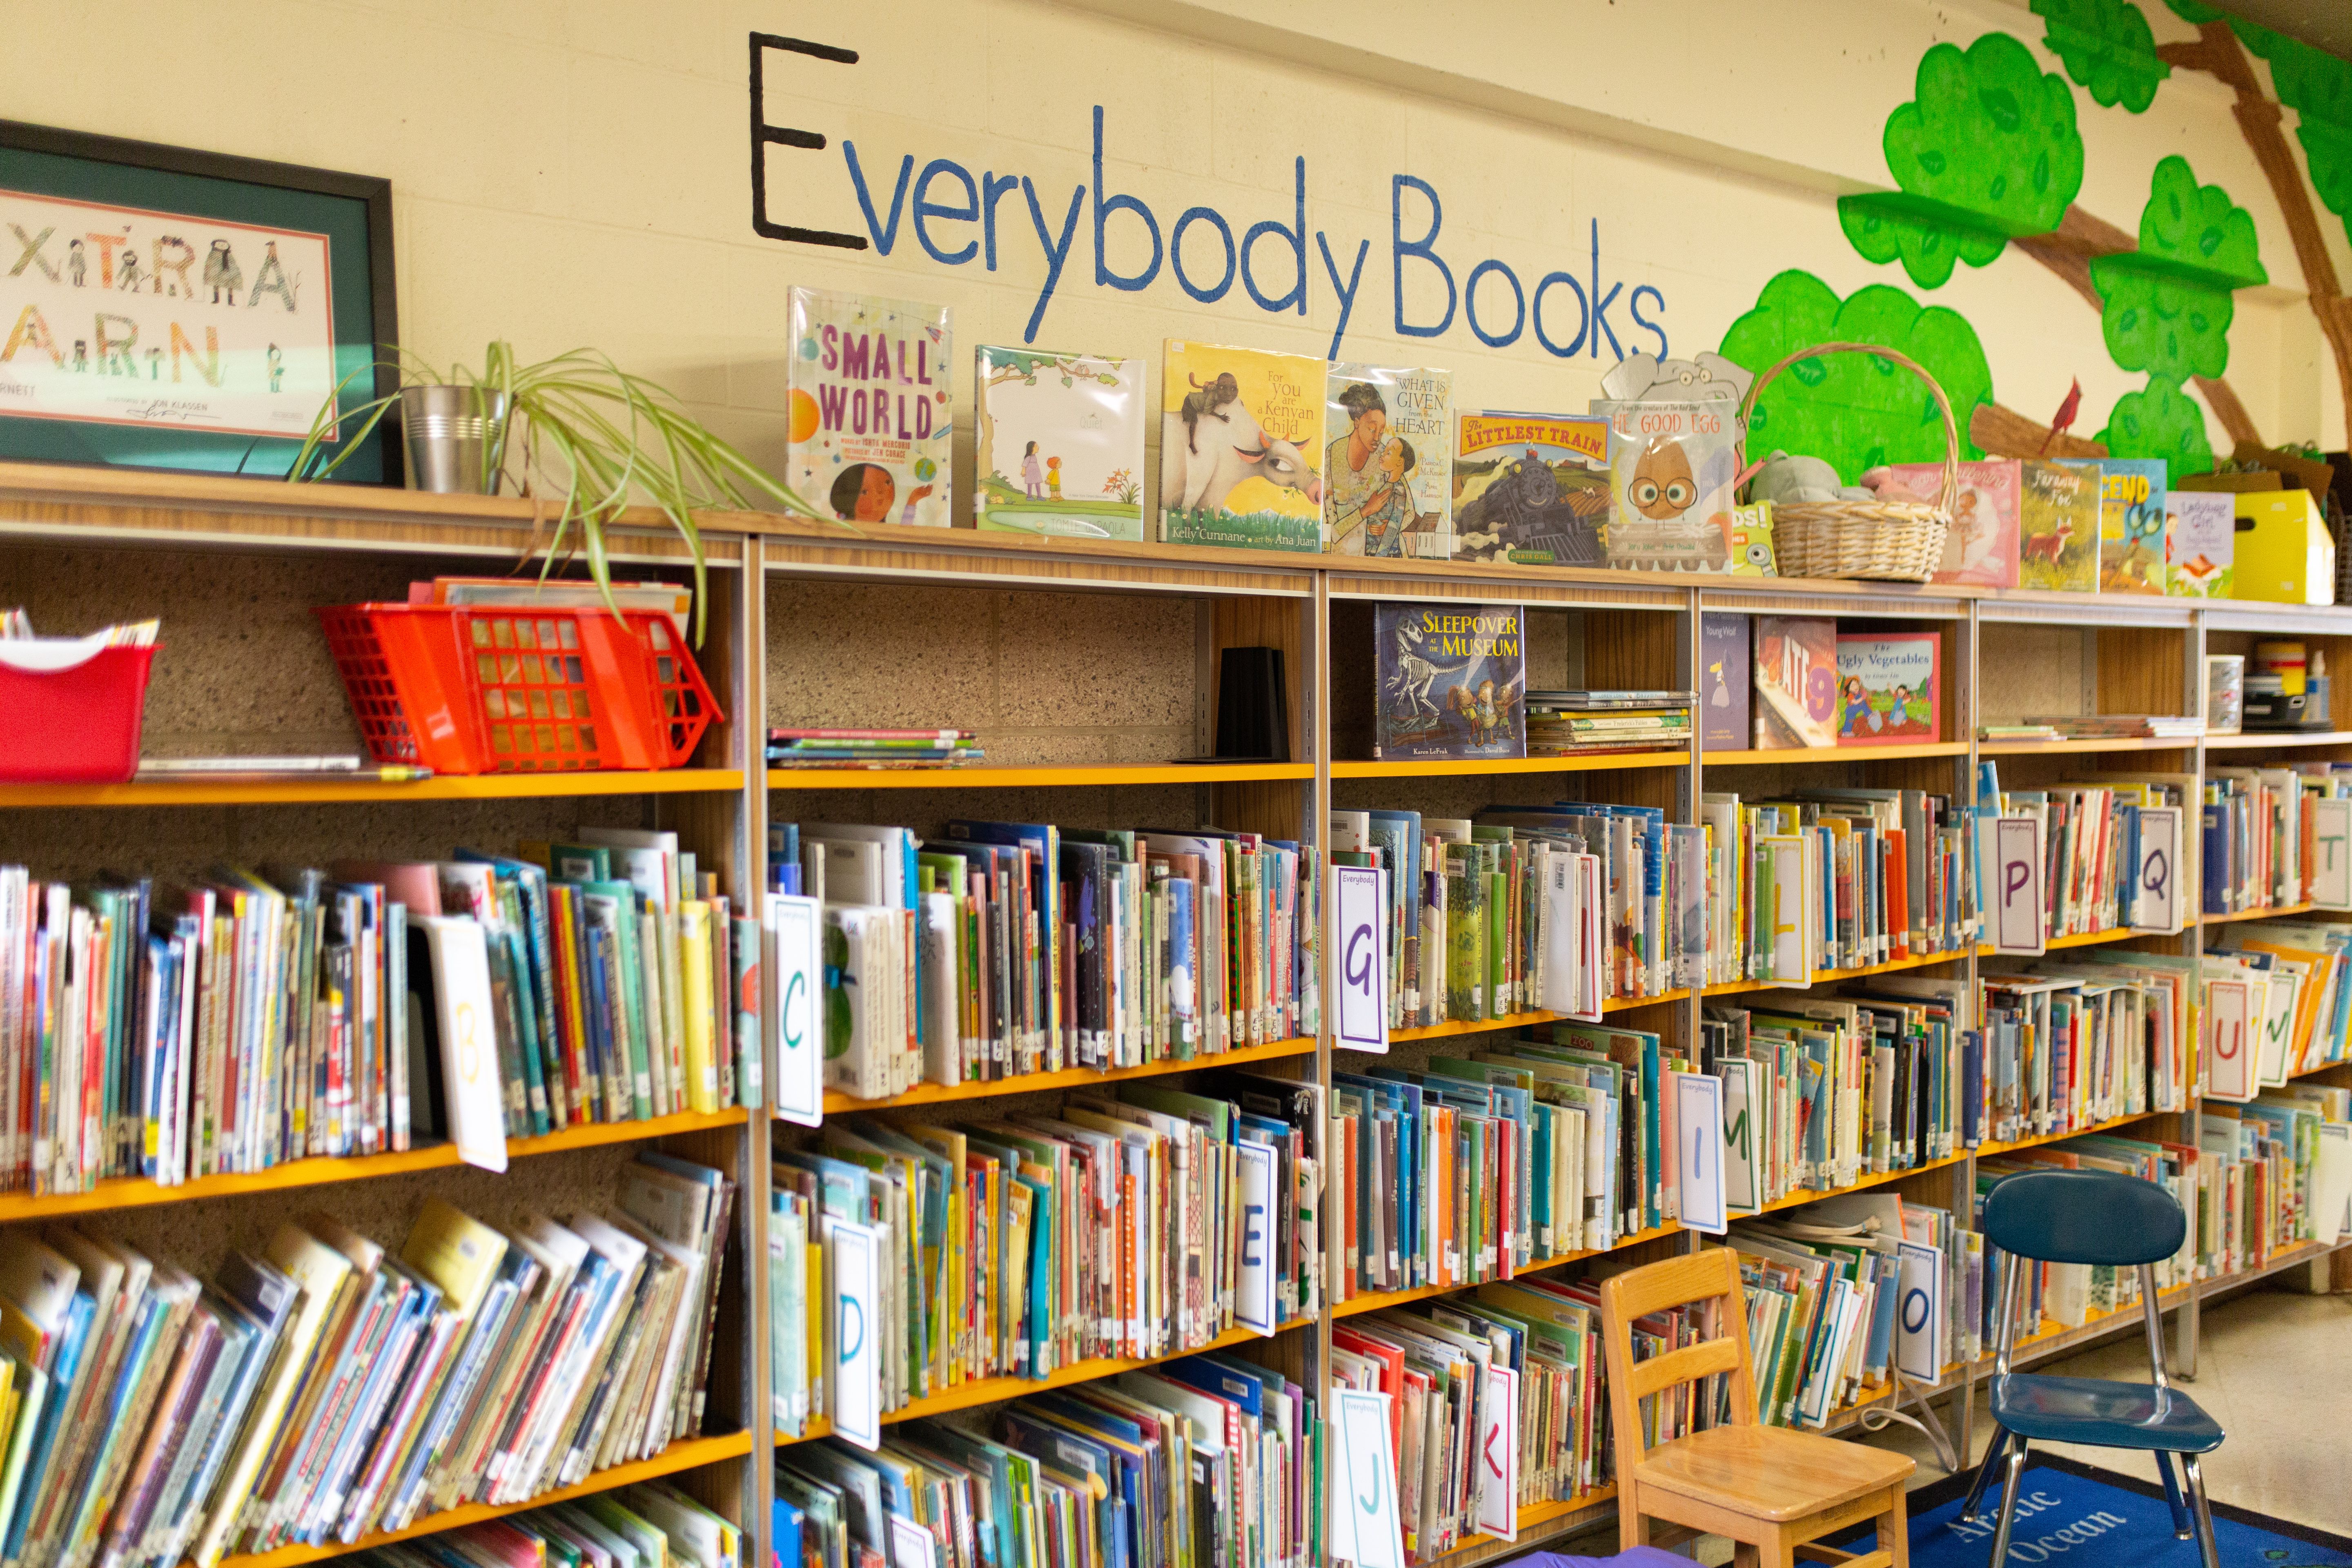 PreK-2 classroom library with rows of bookshelves